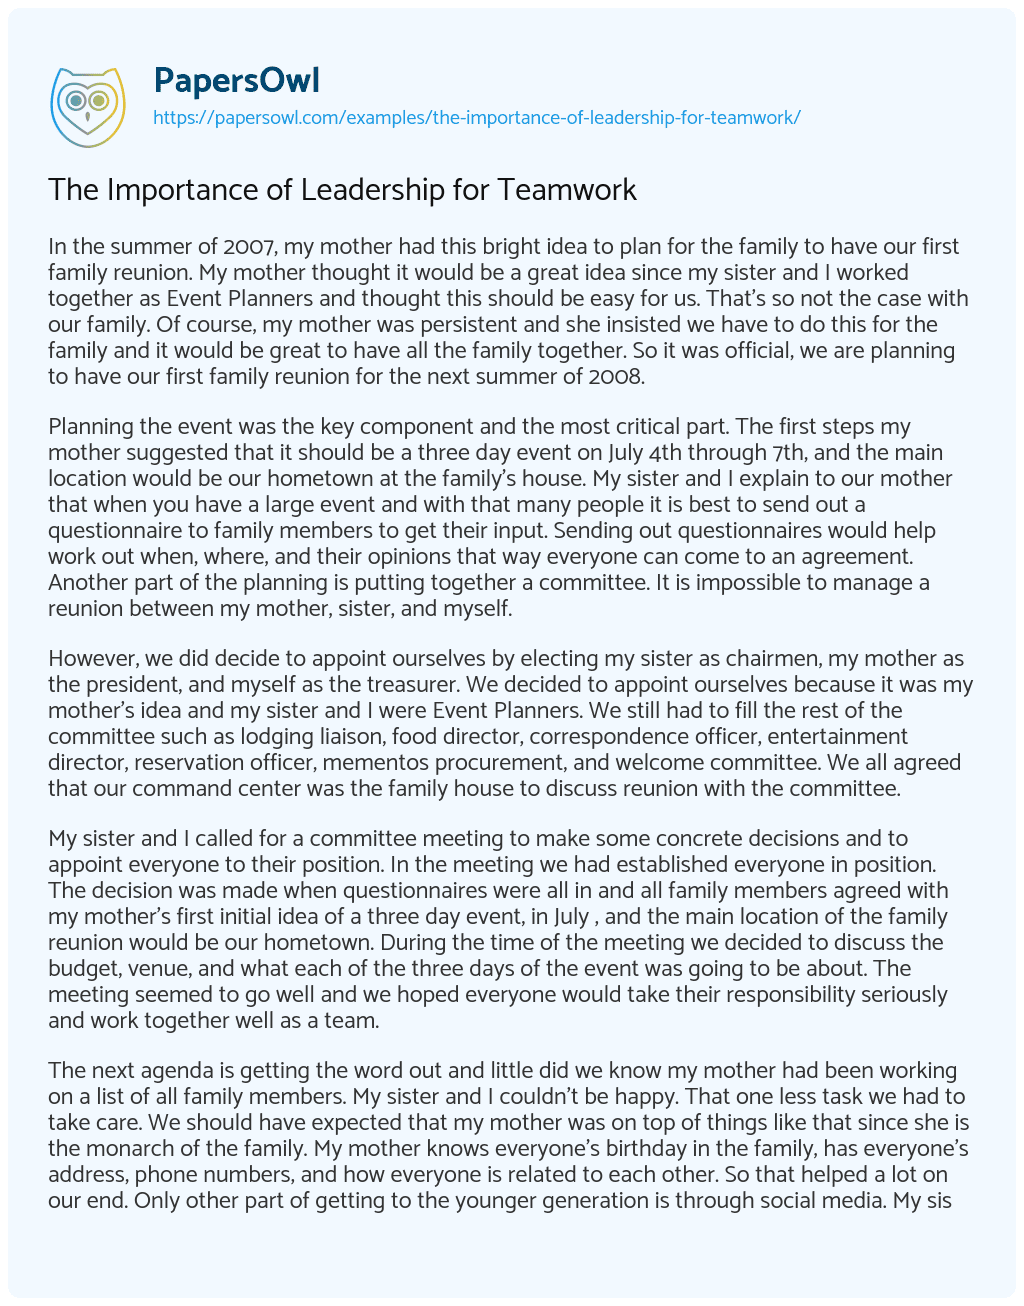 Essay on The Importance of Leadership for Teamwork